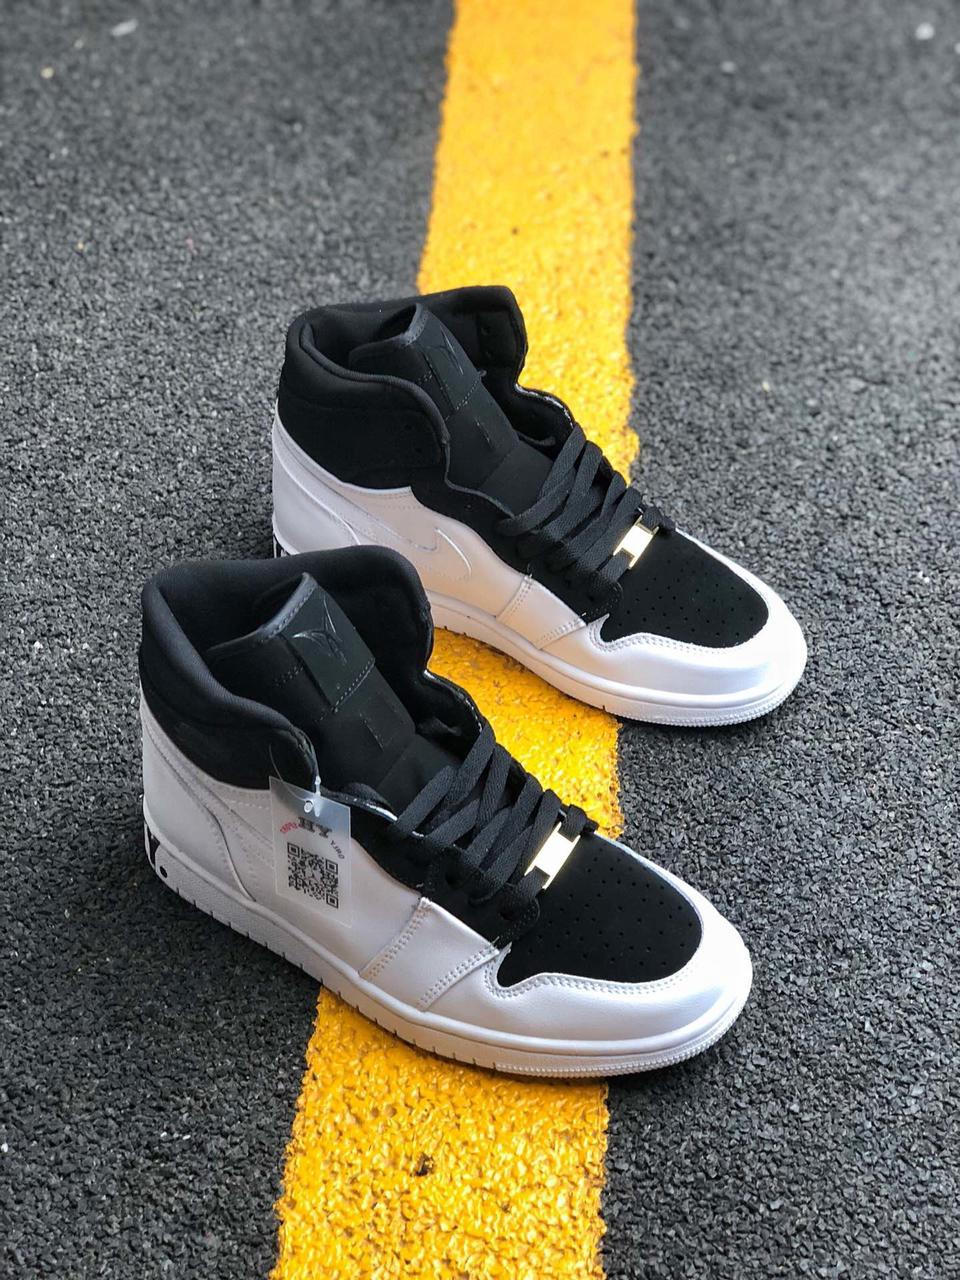 Imported Mid Equality Sneakers In Stock